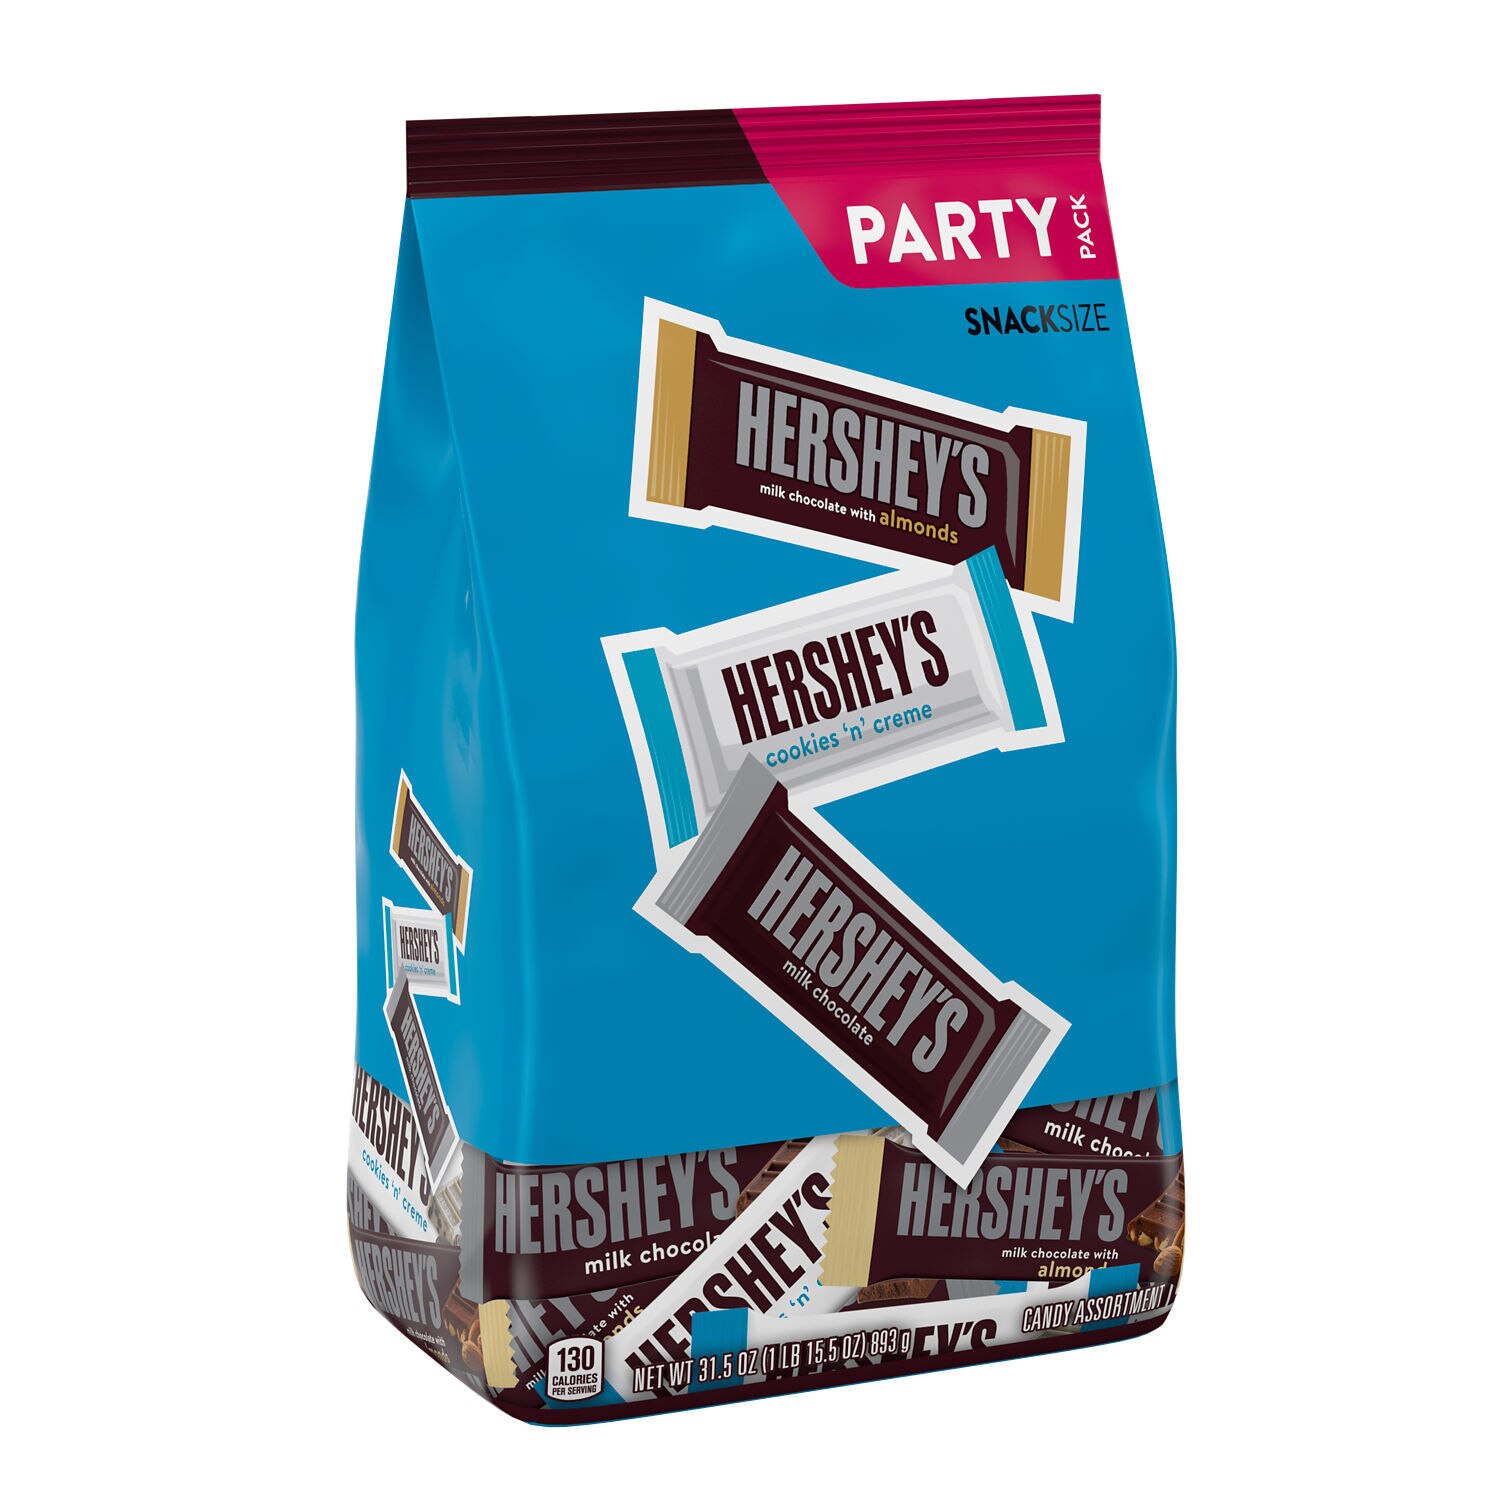 Hershey's Snack Size Chocolate And White Creme Candy Bar Assortment, 31.5 OZ